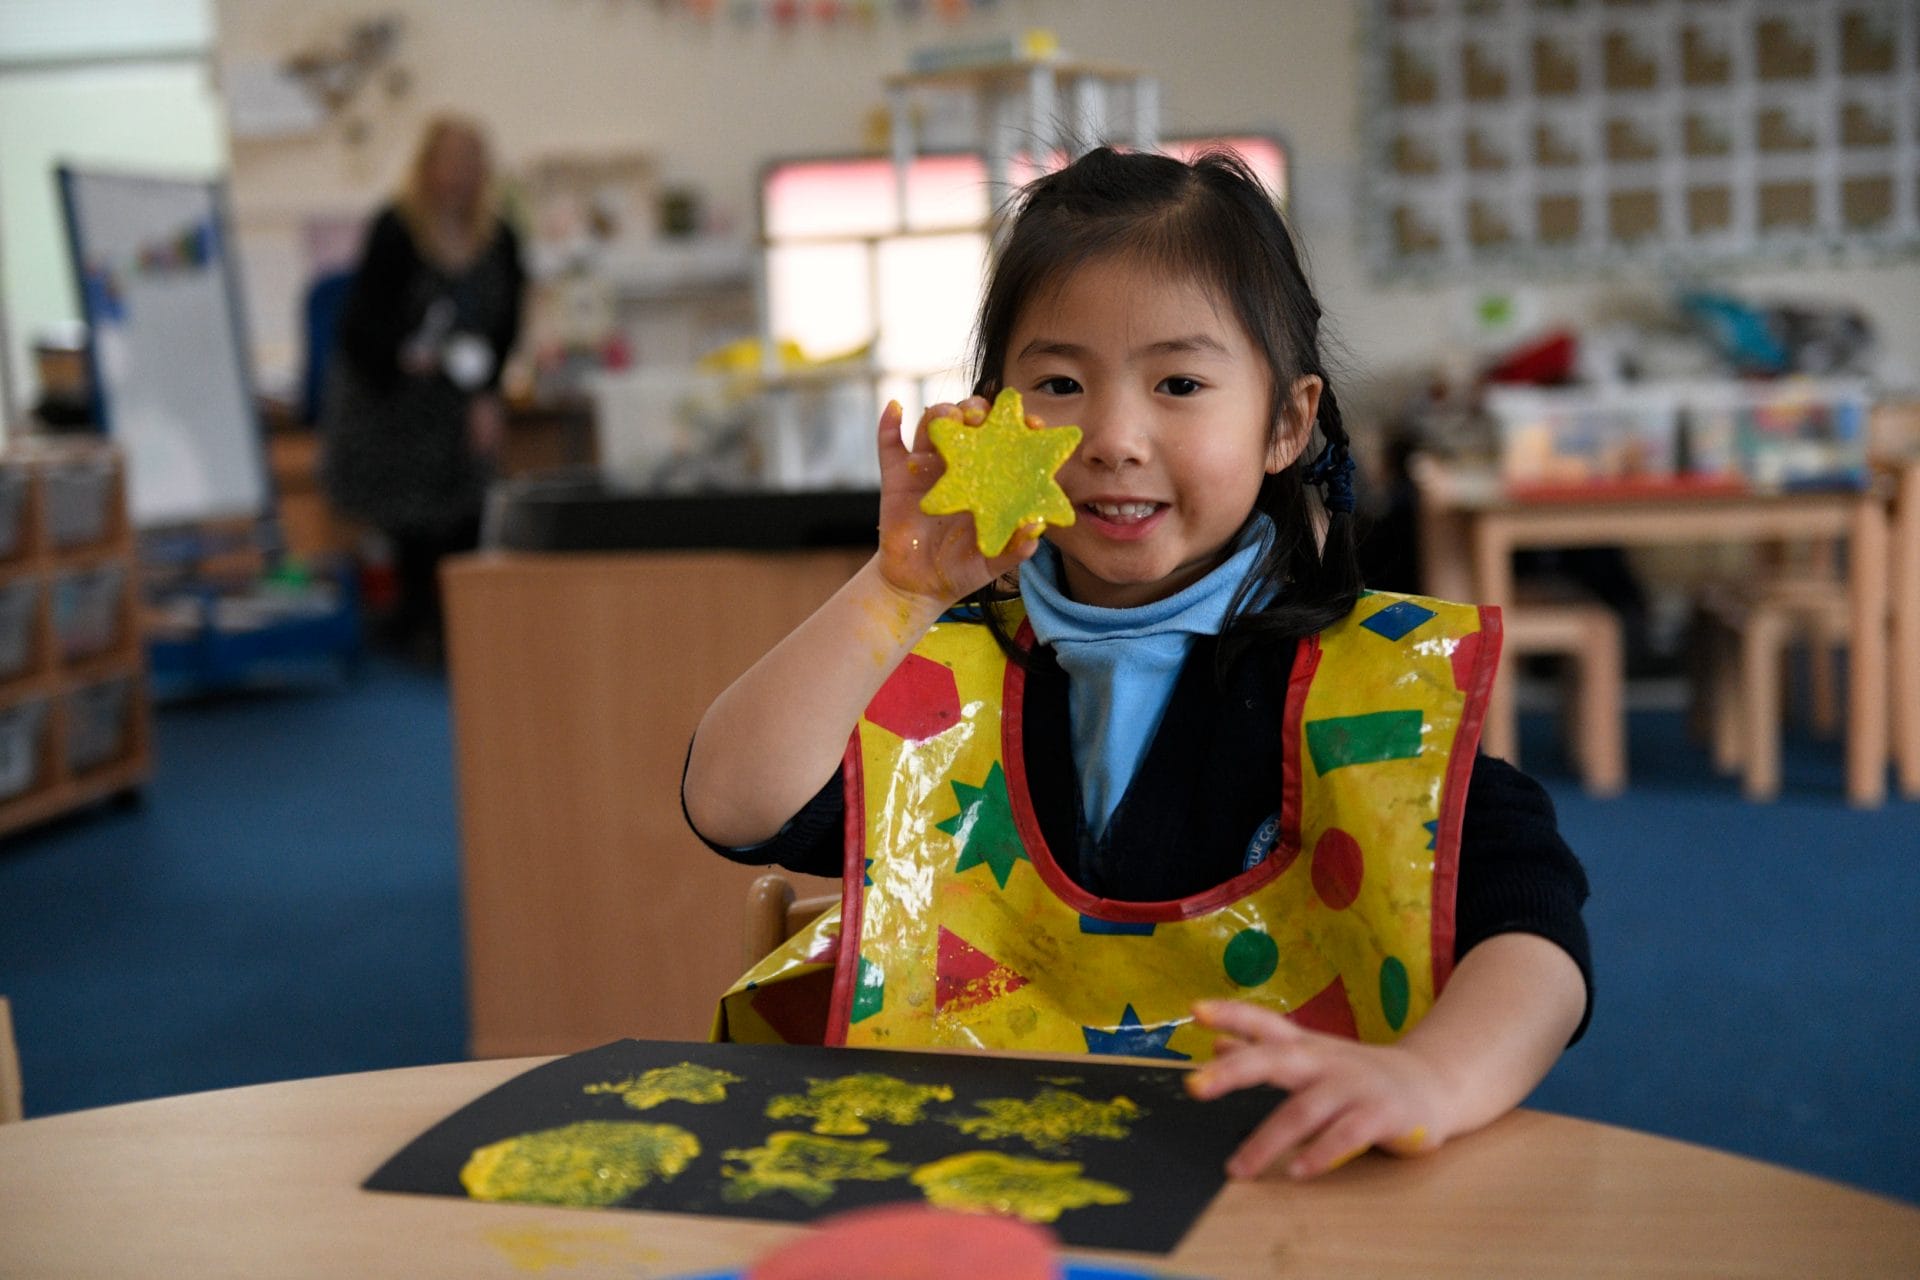 A girl holding up a star stencil with yellow paint on it and the piece of paper in front of her contains six yellow painted stars.